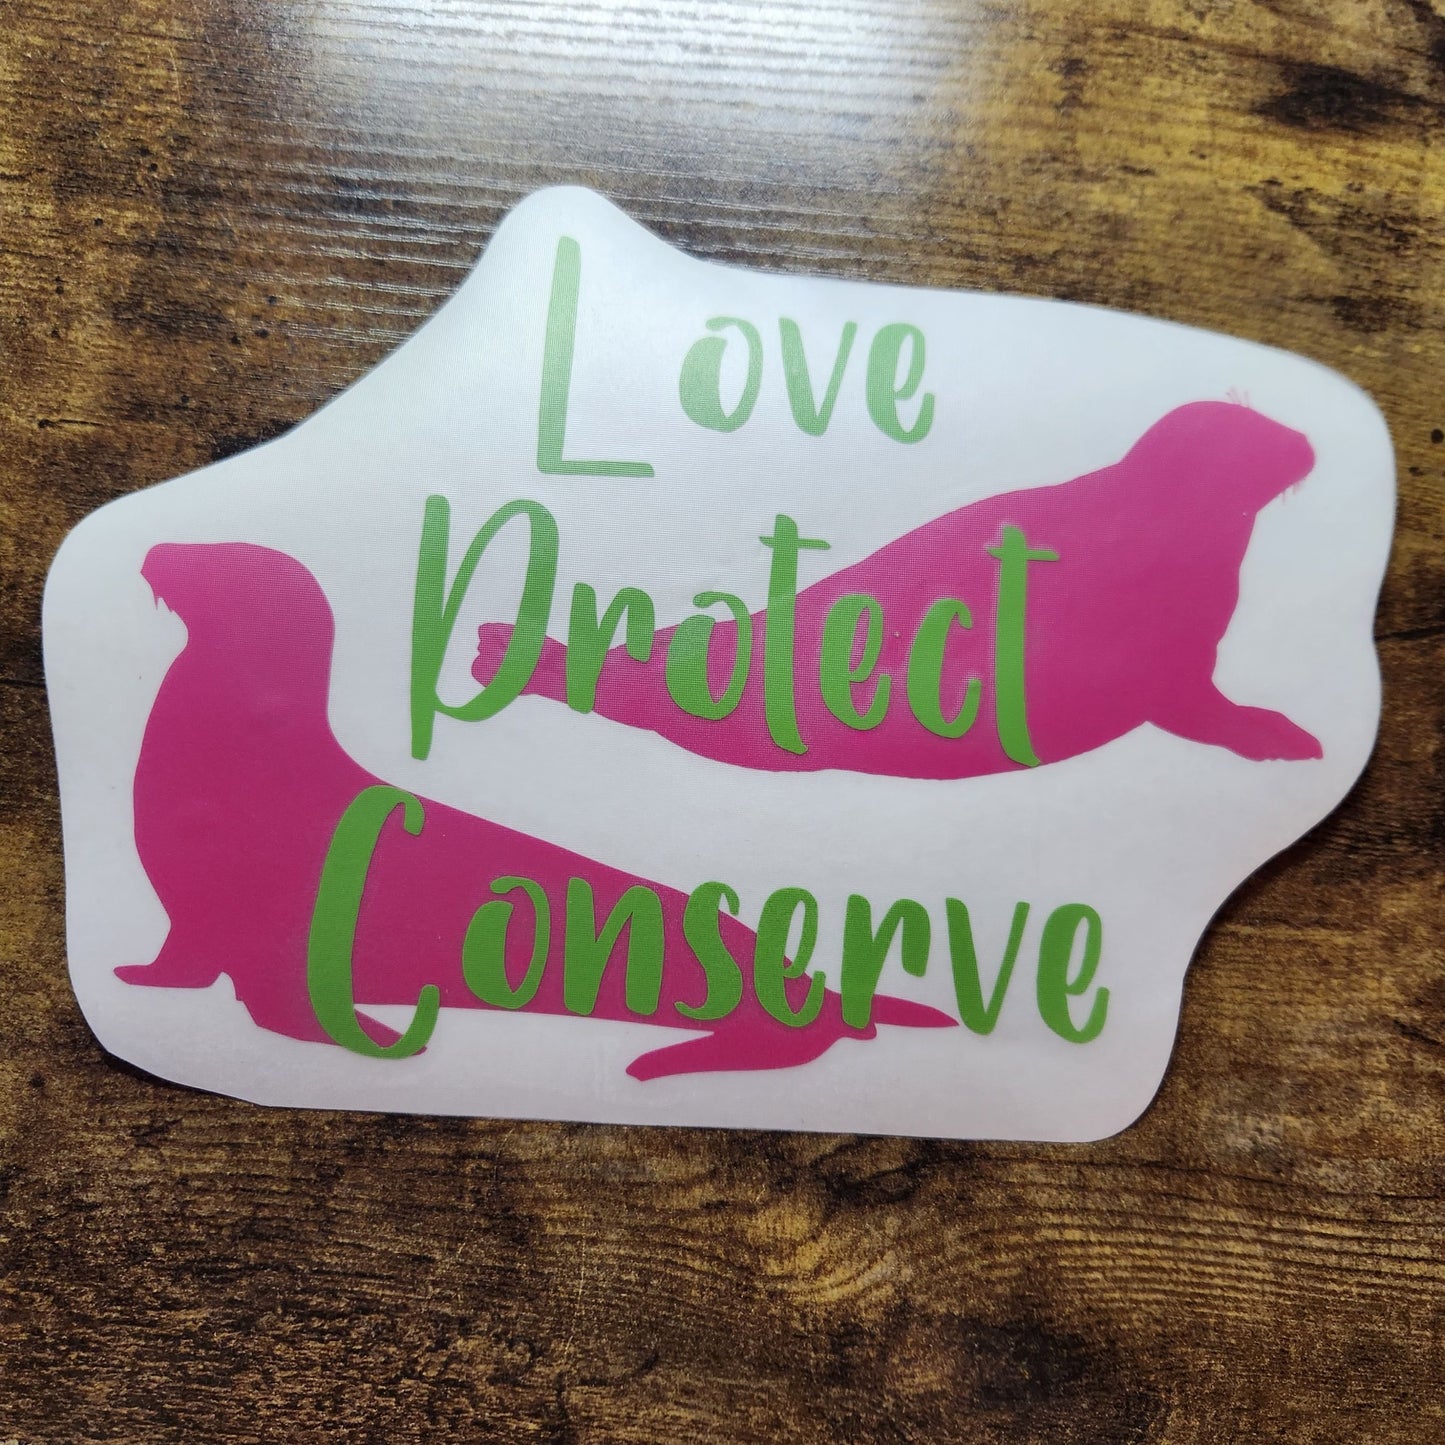 Seal and Sea Lion - Layered Love Protect Conserve - Vinyl Decal (Made to Order)